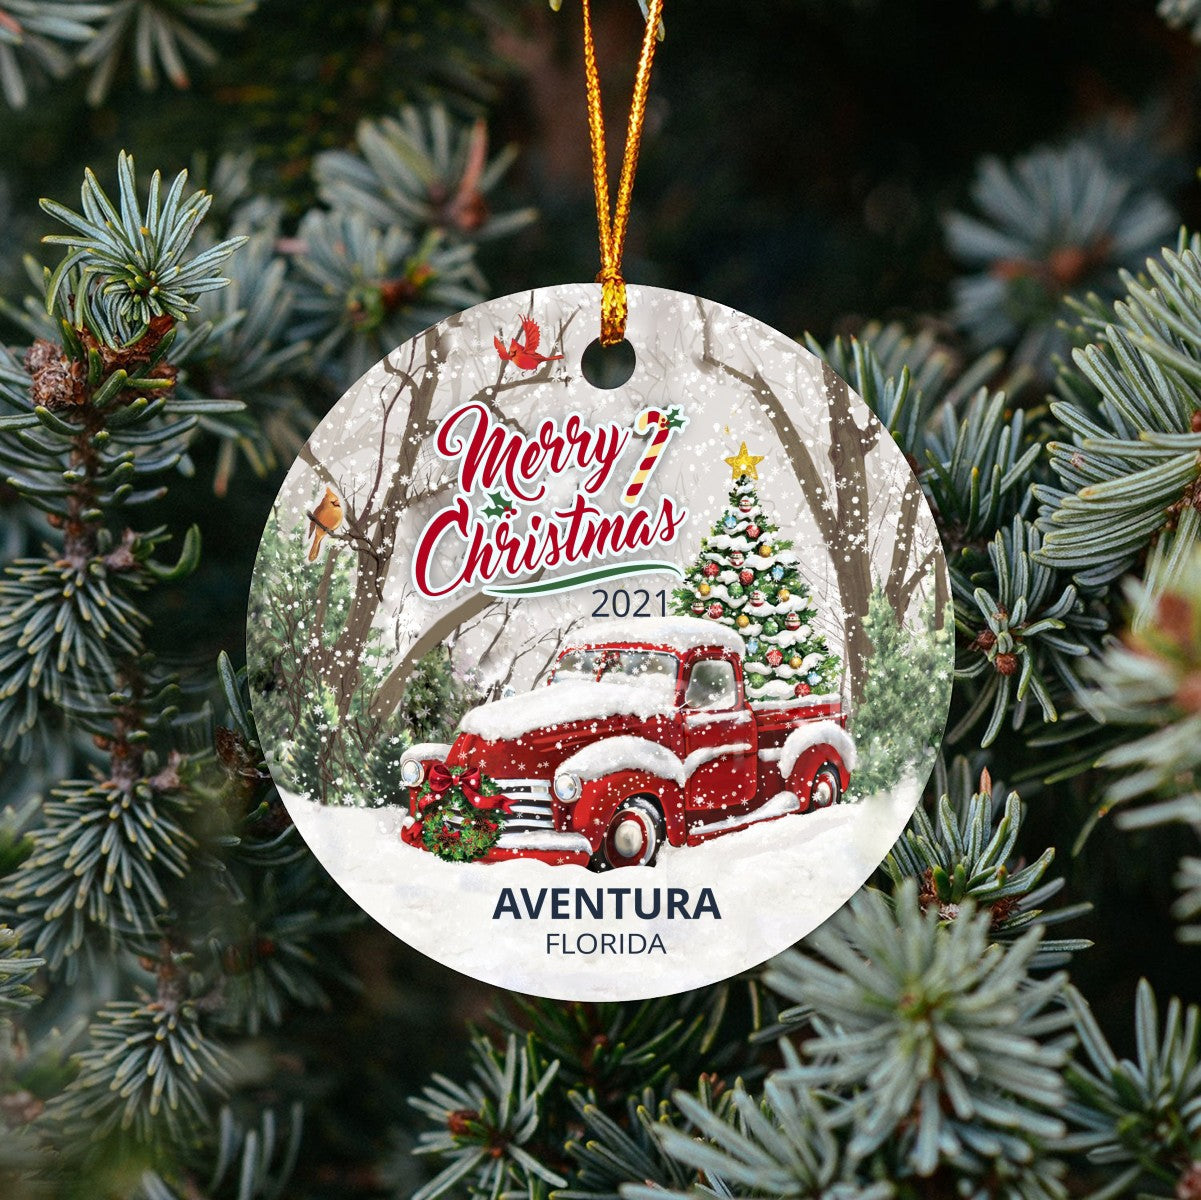 Christmas Tree Ornaments Aventura - Ornament Customize With Name City And State Aventura Florida FL - Red Truck Xmas Ornaments 3'' Plastic Gift For Family, Friend And Housewarming